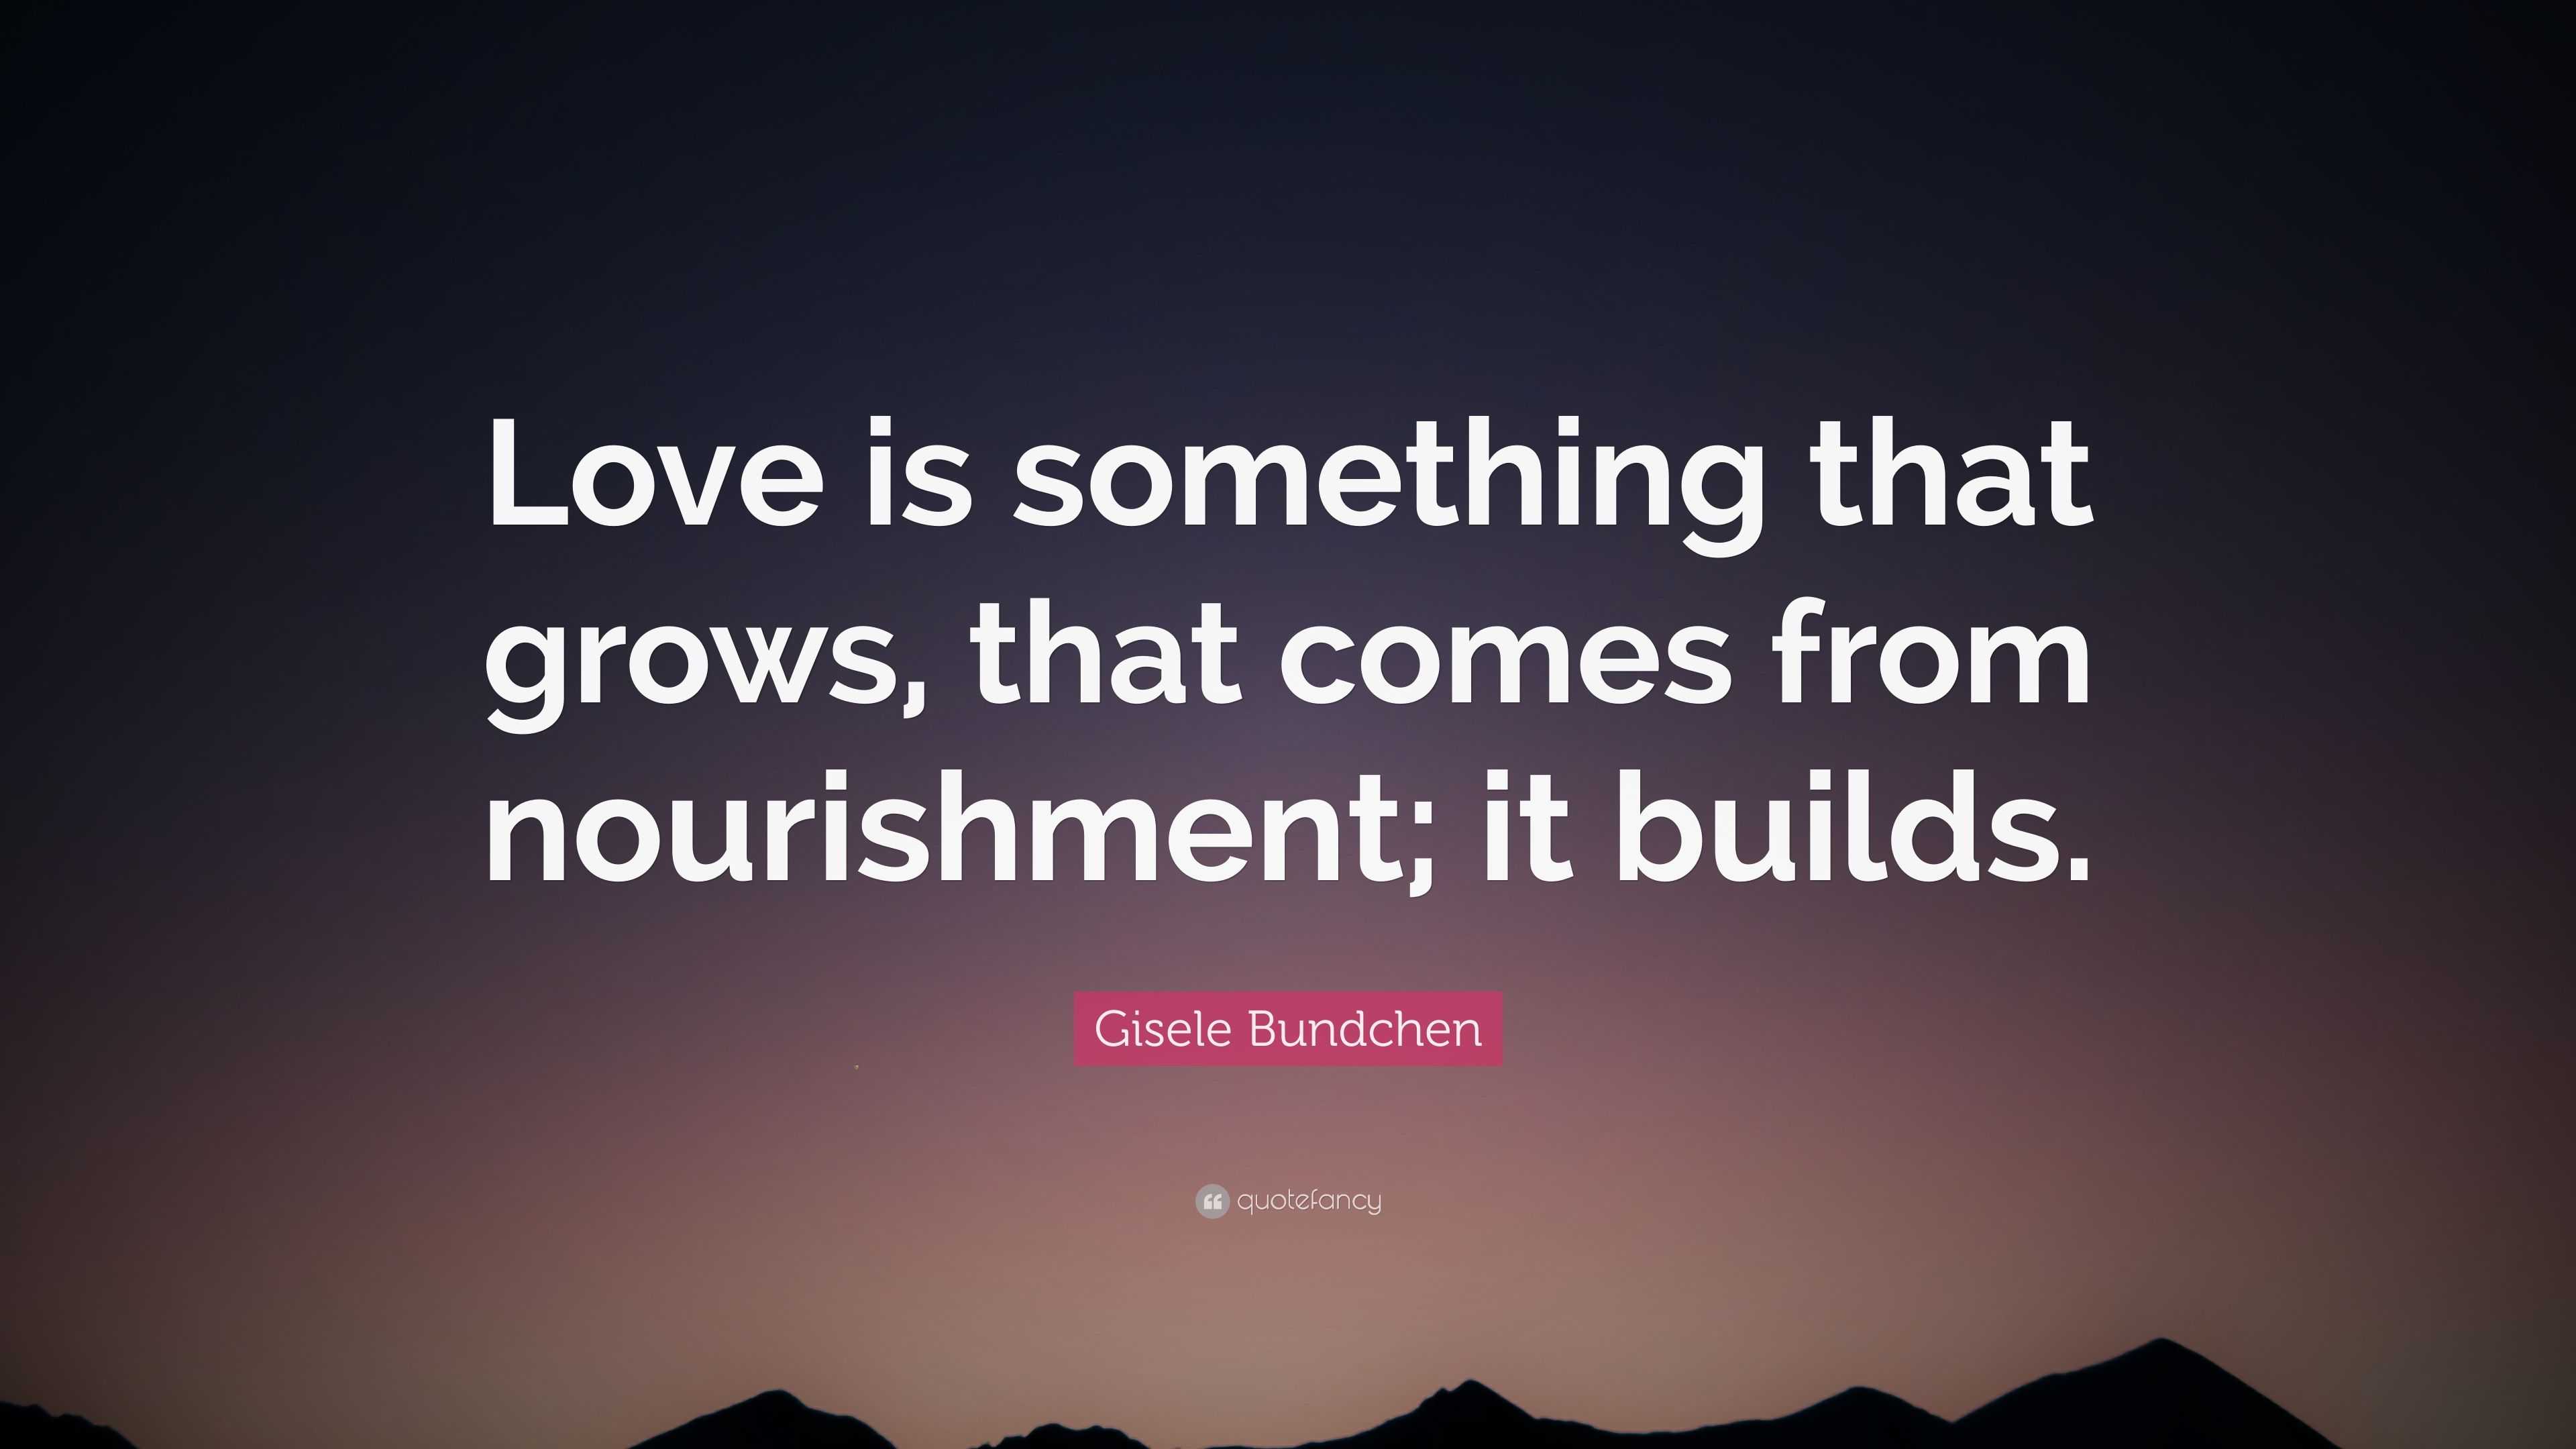 Gisele Bundchen Quote: “Love is something that grows, that comes